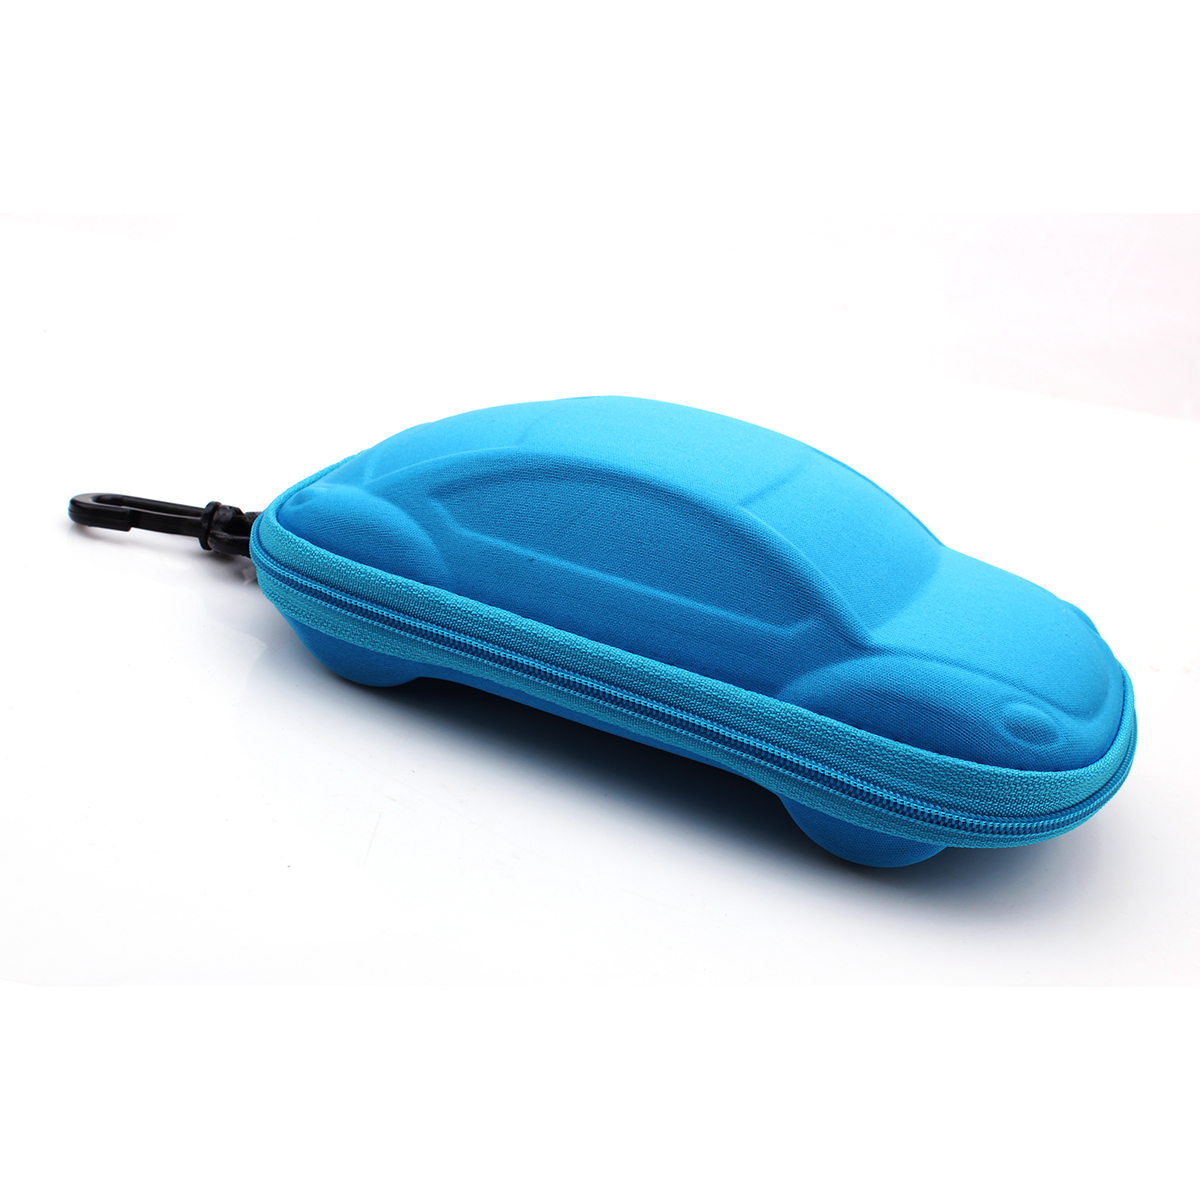 With Hook (2 Sky Blue In Same Color)2 individual a car glasses case Cartoon automobile Model children Sun glasses Box lovely zipper bag Toy box